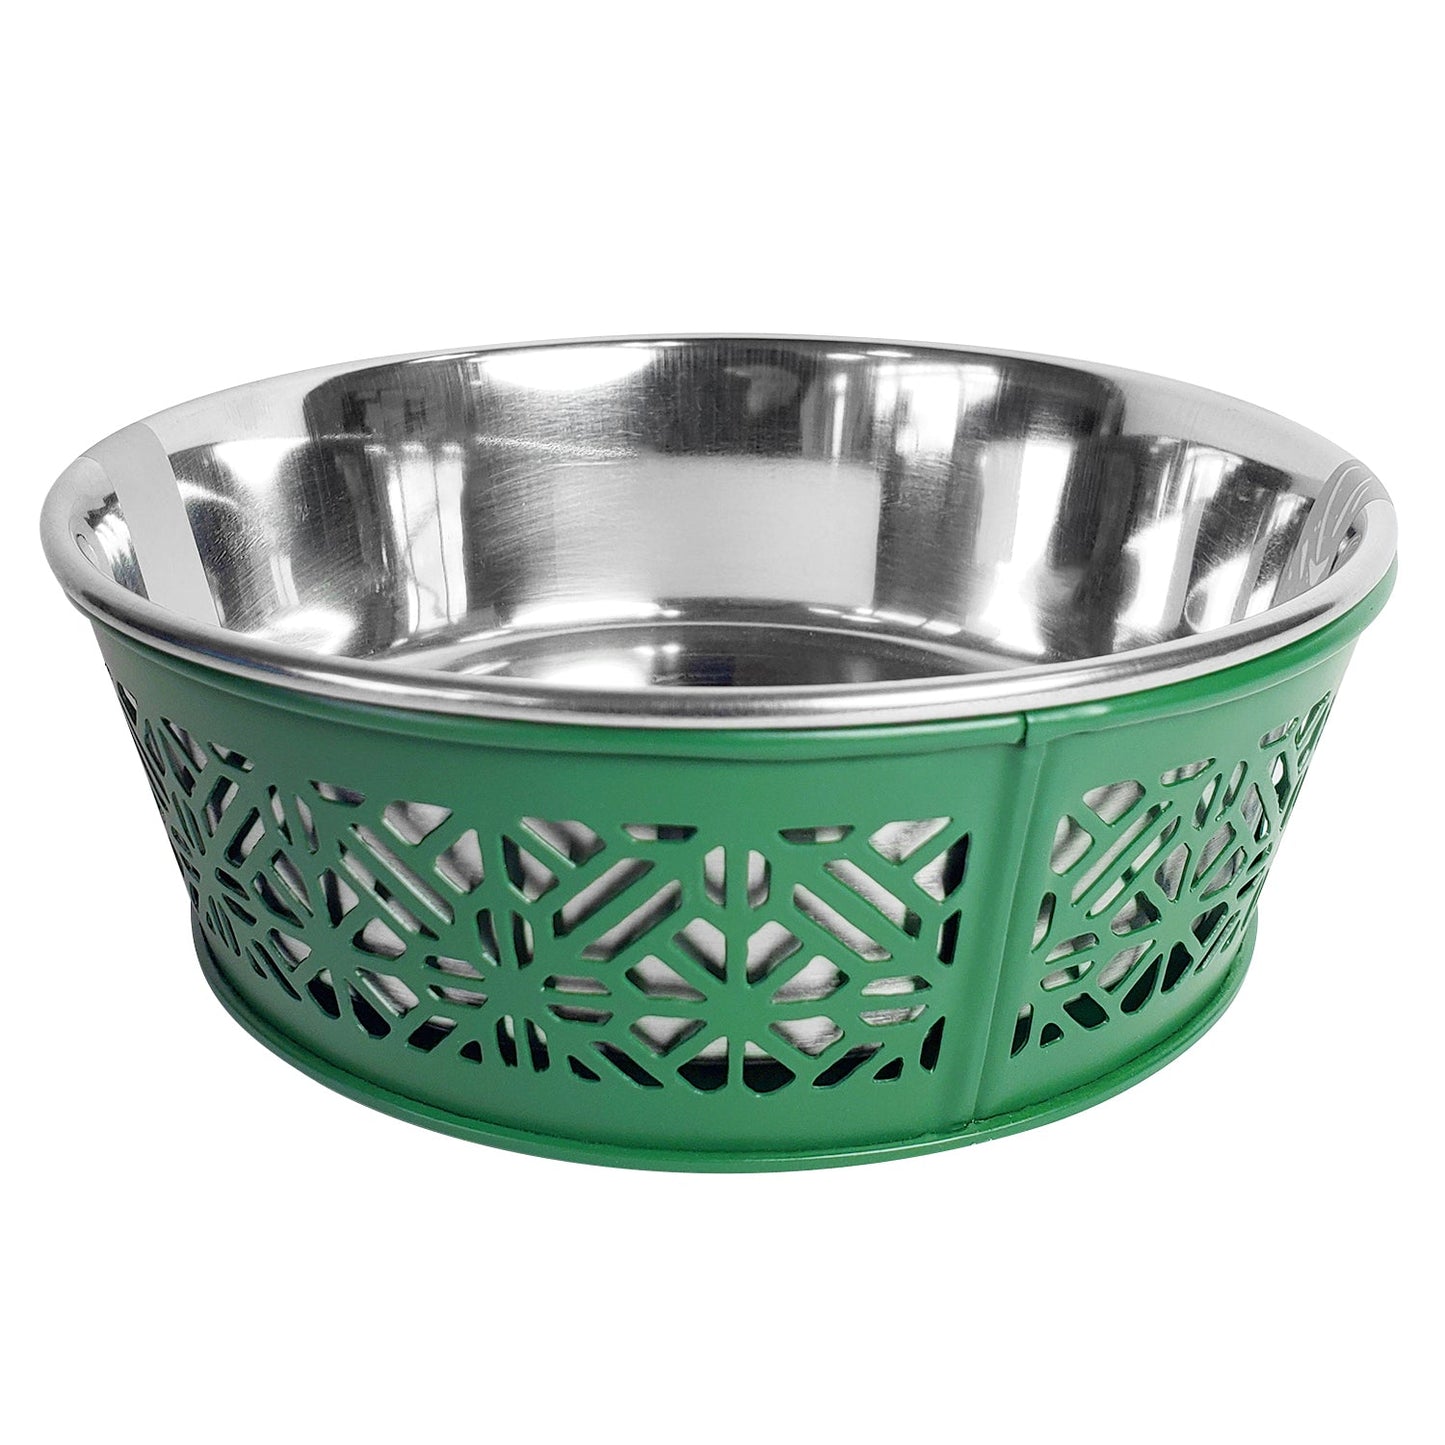 Country Bowl - Stainless Steel - Dark Green-0